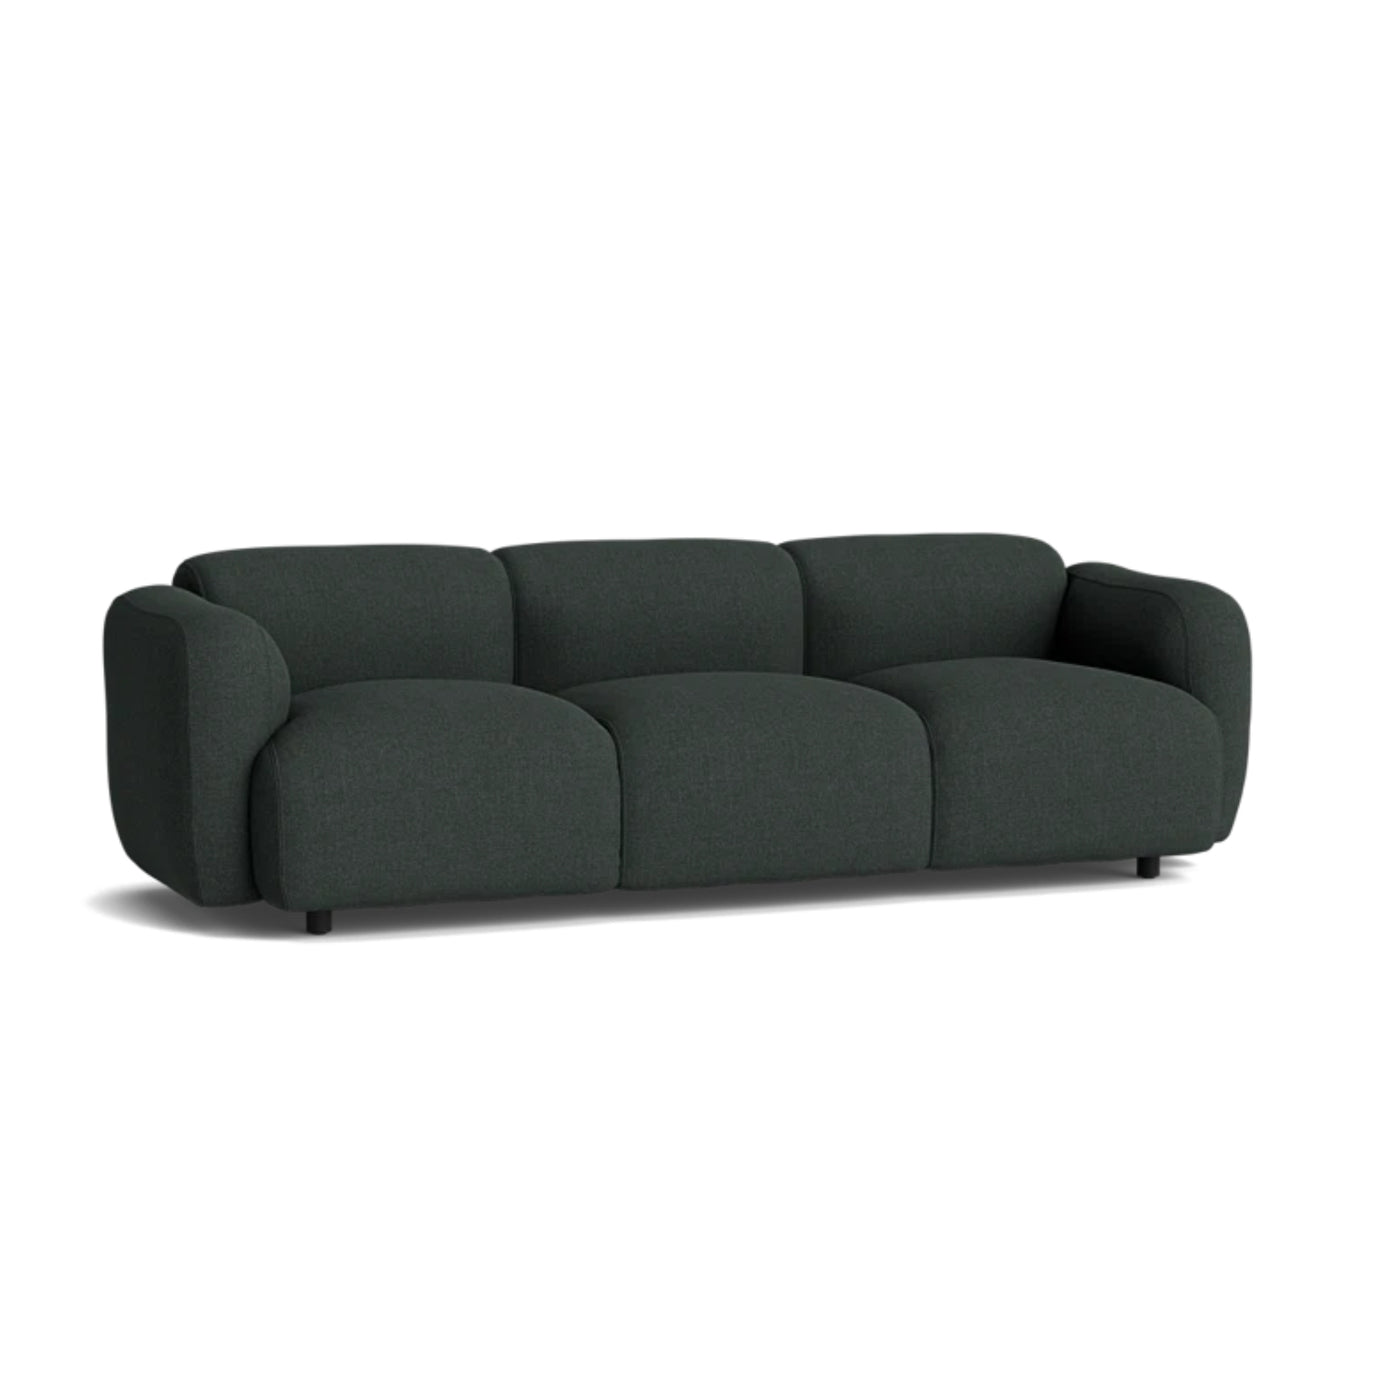 Normann Copenhagen Swell 3 Seater Sofa at someday designs. #colour_remix-973